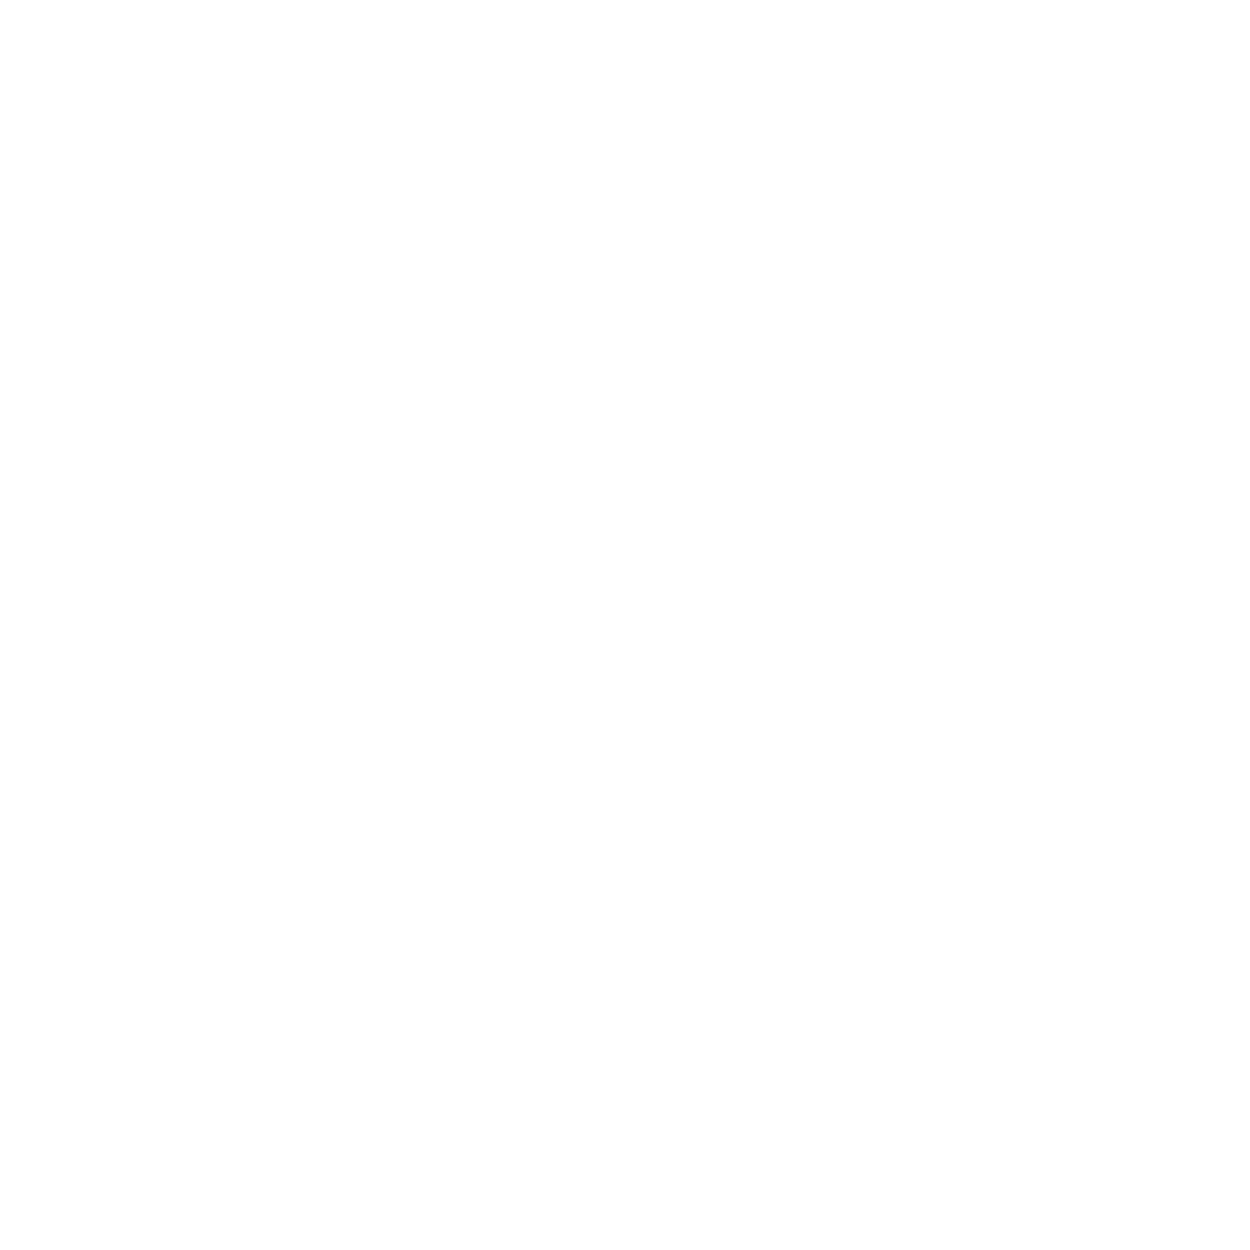 BASSO INDUSTRY CORP.